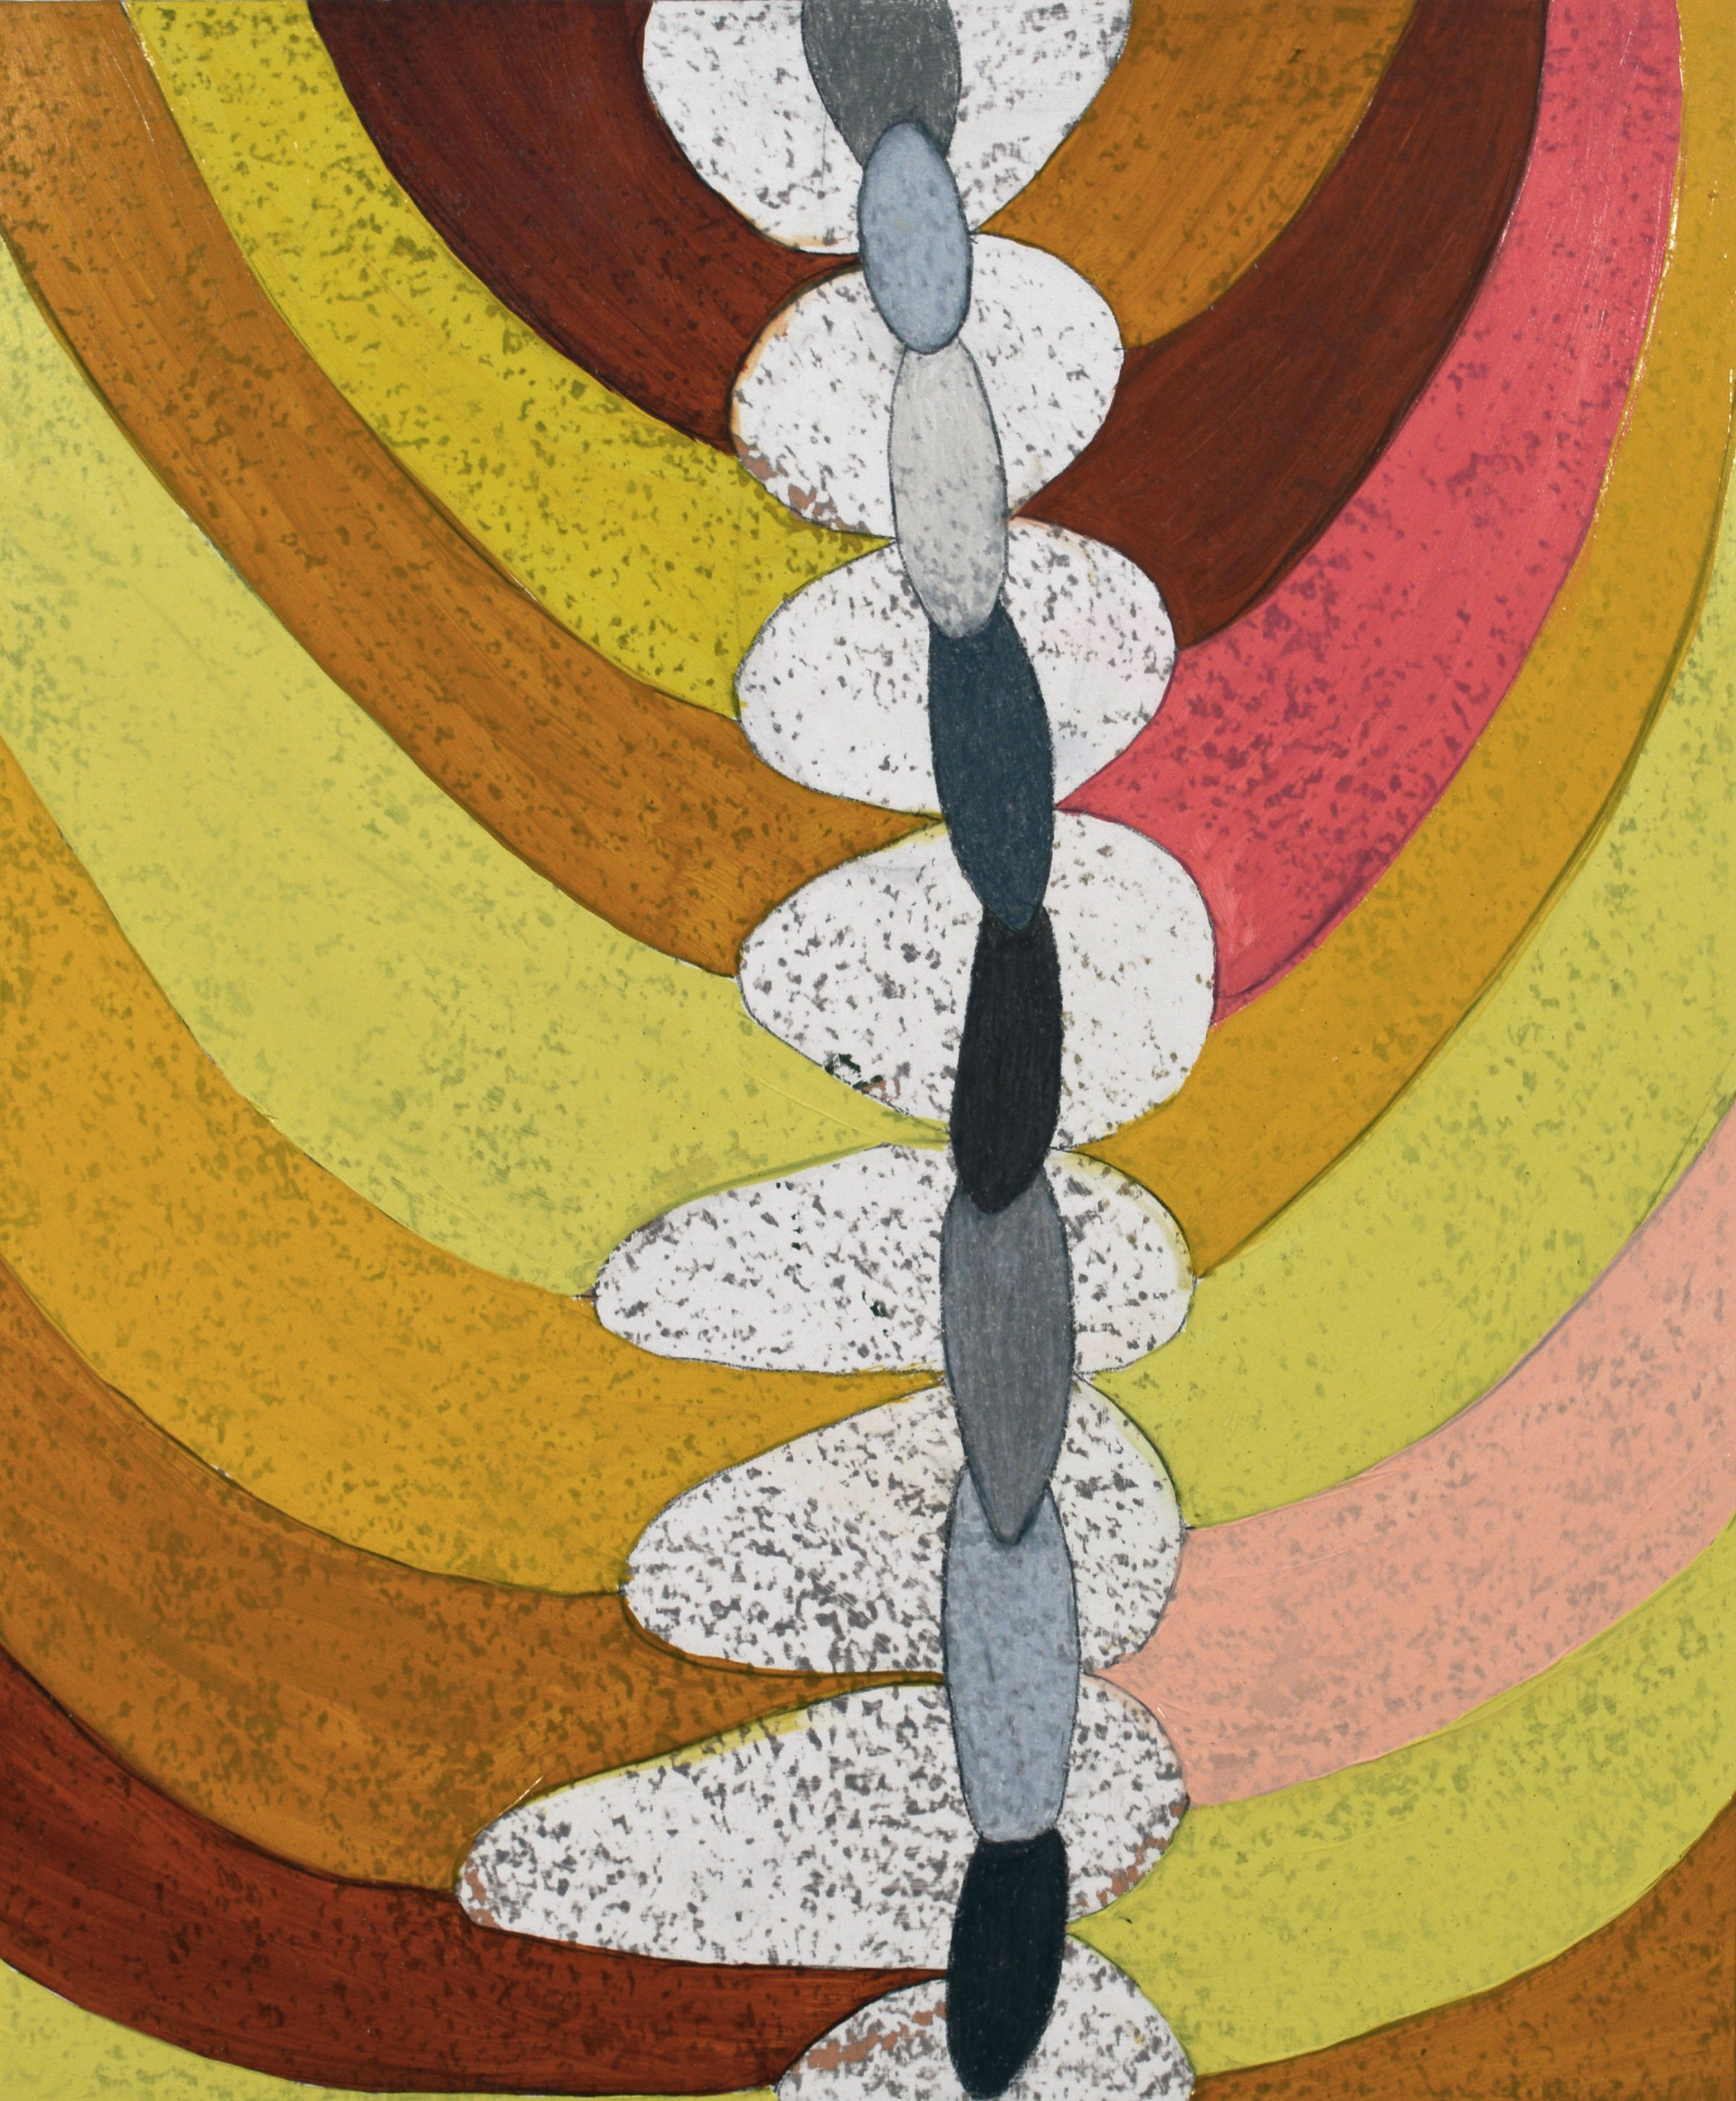  Sprung, 2015  oil, pencil, and colored pencil on panel, 18.5 x 15.5  (46.9 x 39.3 cm)  